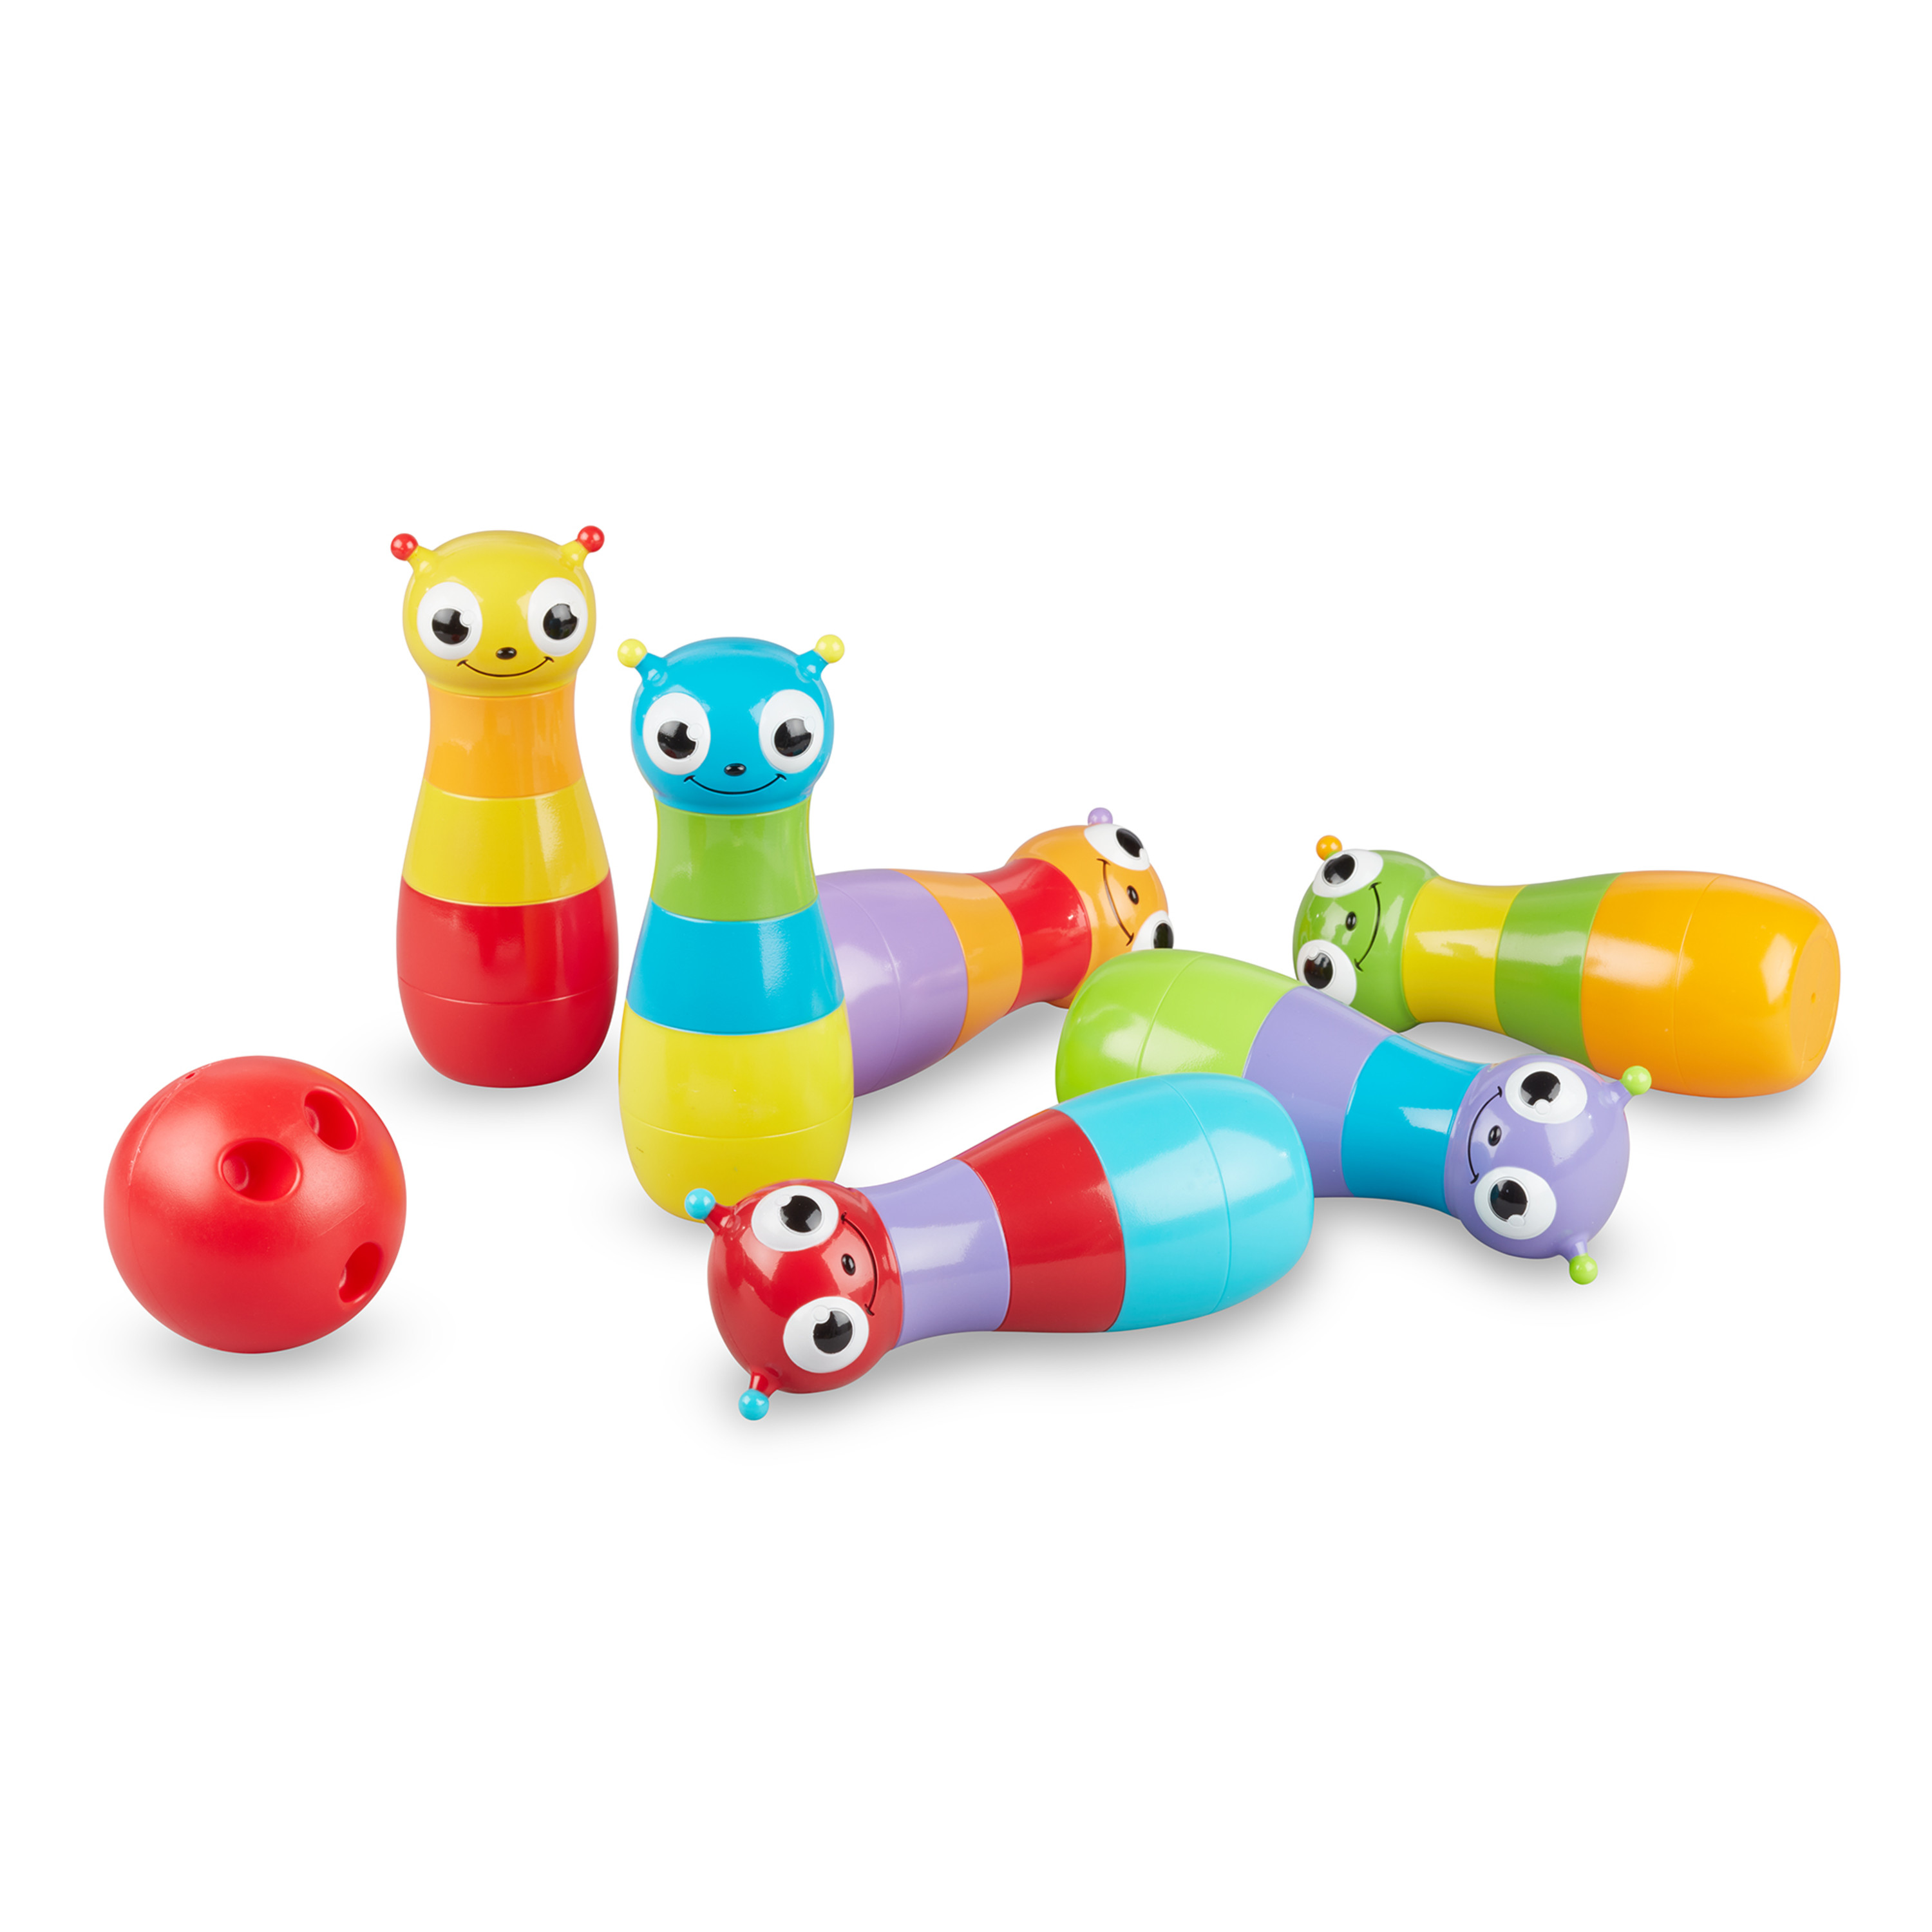 Melissa & Doug Cute as a Bug Bowling Set Kids Indoor Outdoor Game (8 Pcs) - image 4 of 9